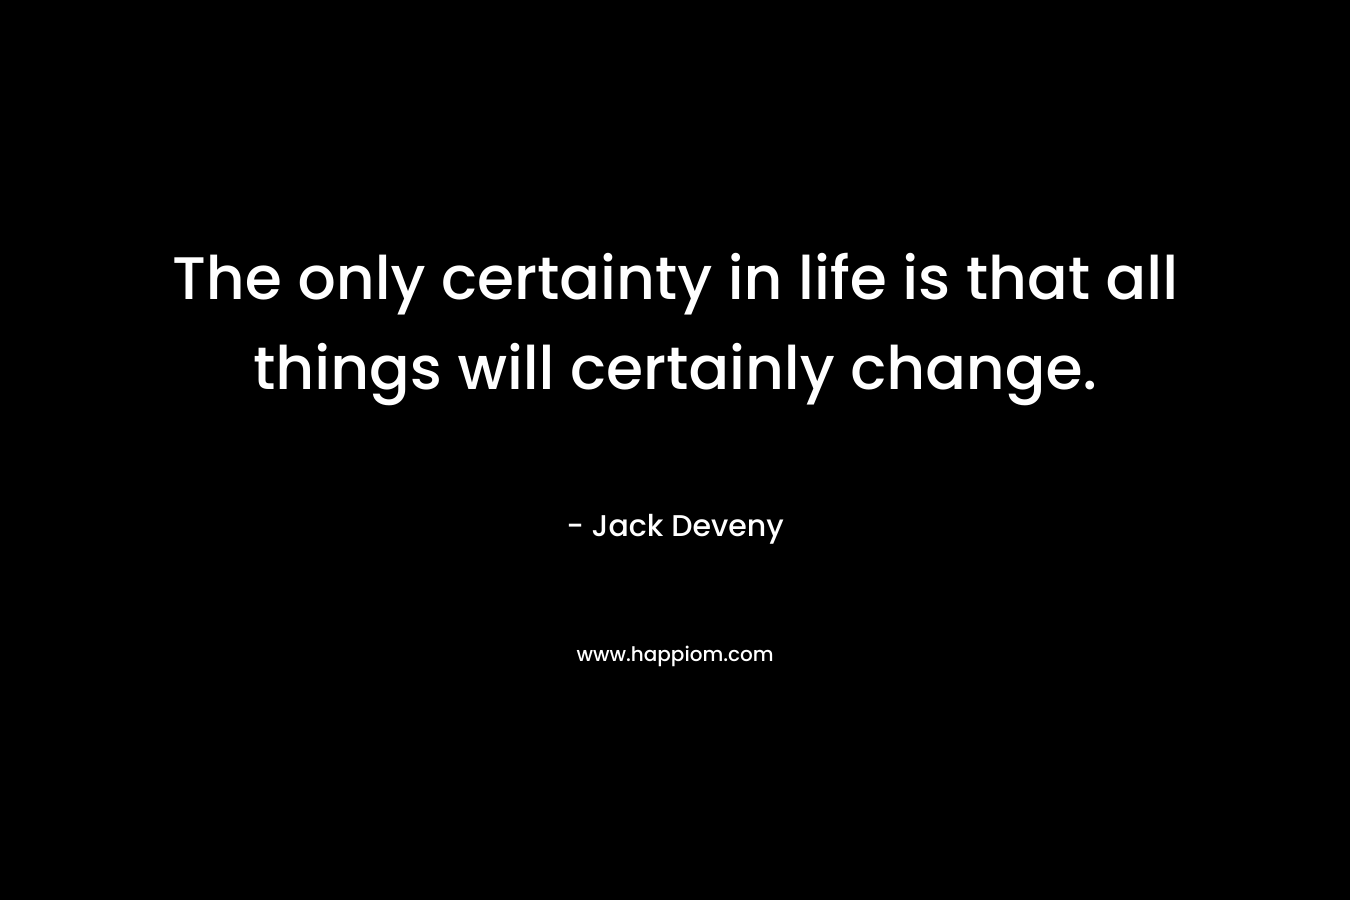 The only certainty in life is that all things will certainly change.